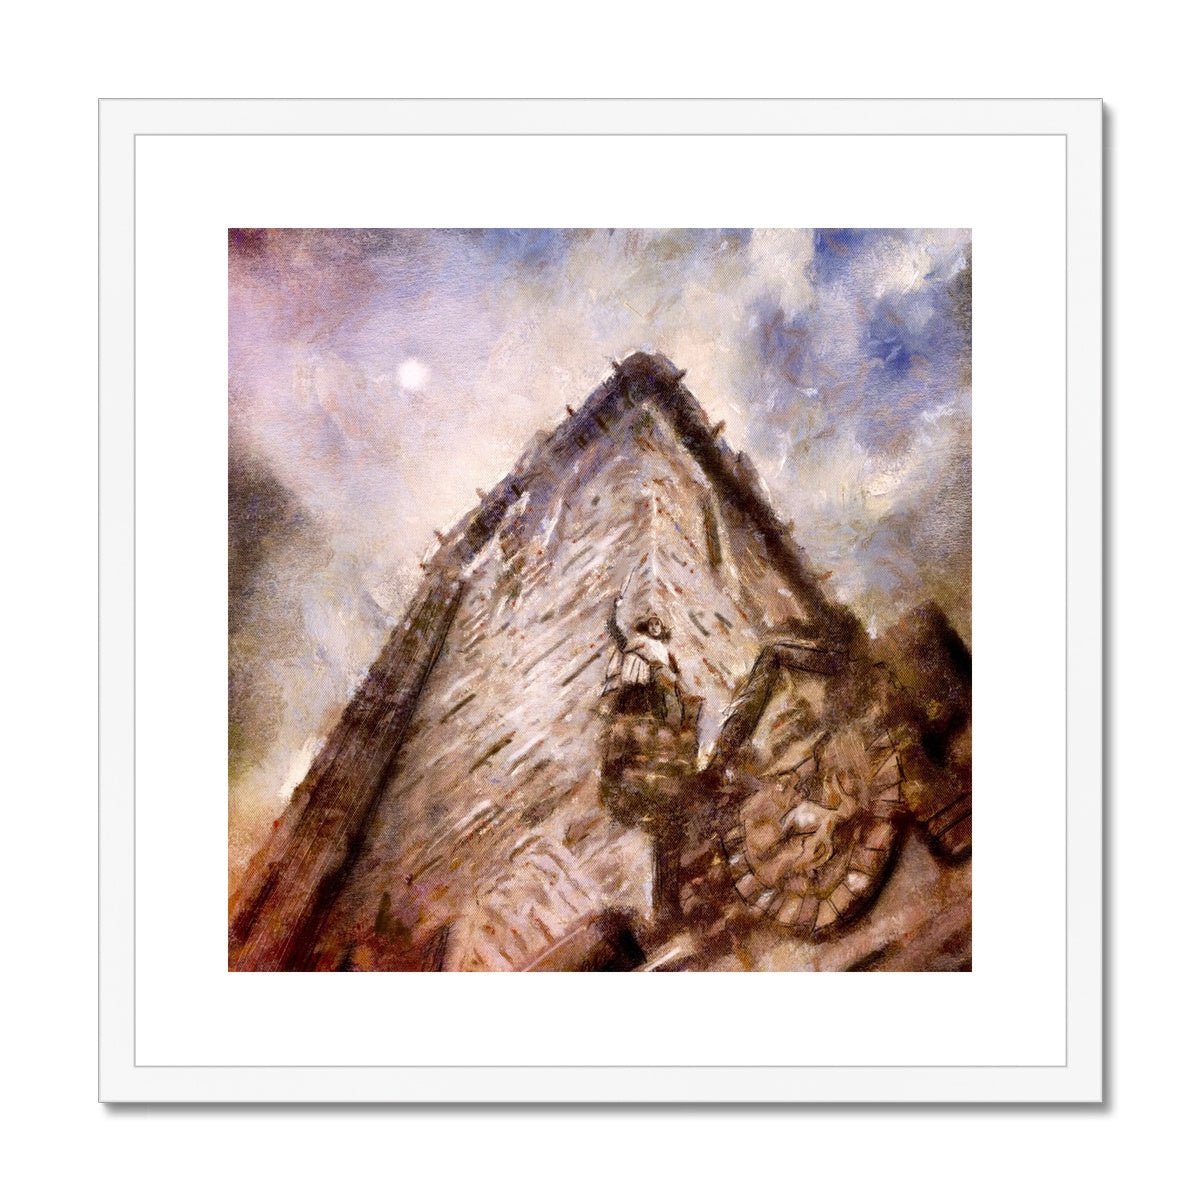 Wallace Monument Moonlight Painting | Framed & Mounted Prints From Scotland-Framed & Mounted Prints-Historic & Iconic Scotland Art Gallery-20"x20"-White Frame-Paintings, Prints, Homeware, Art Gifts From Scotland By Scottish Artist Kevin Hunter